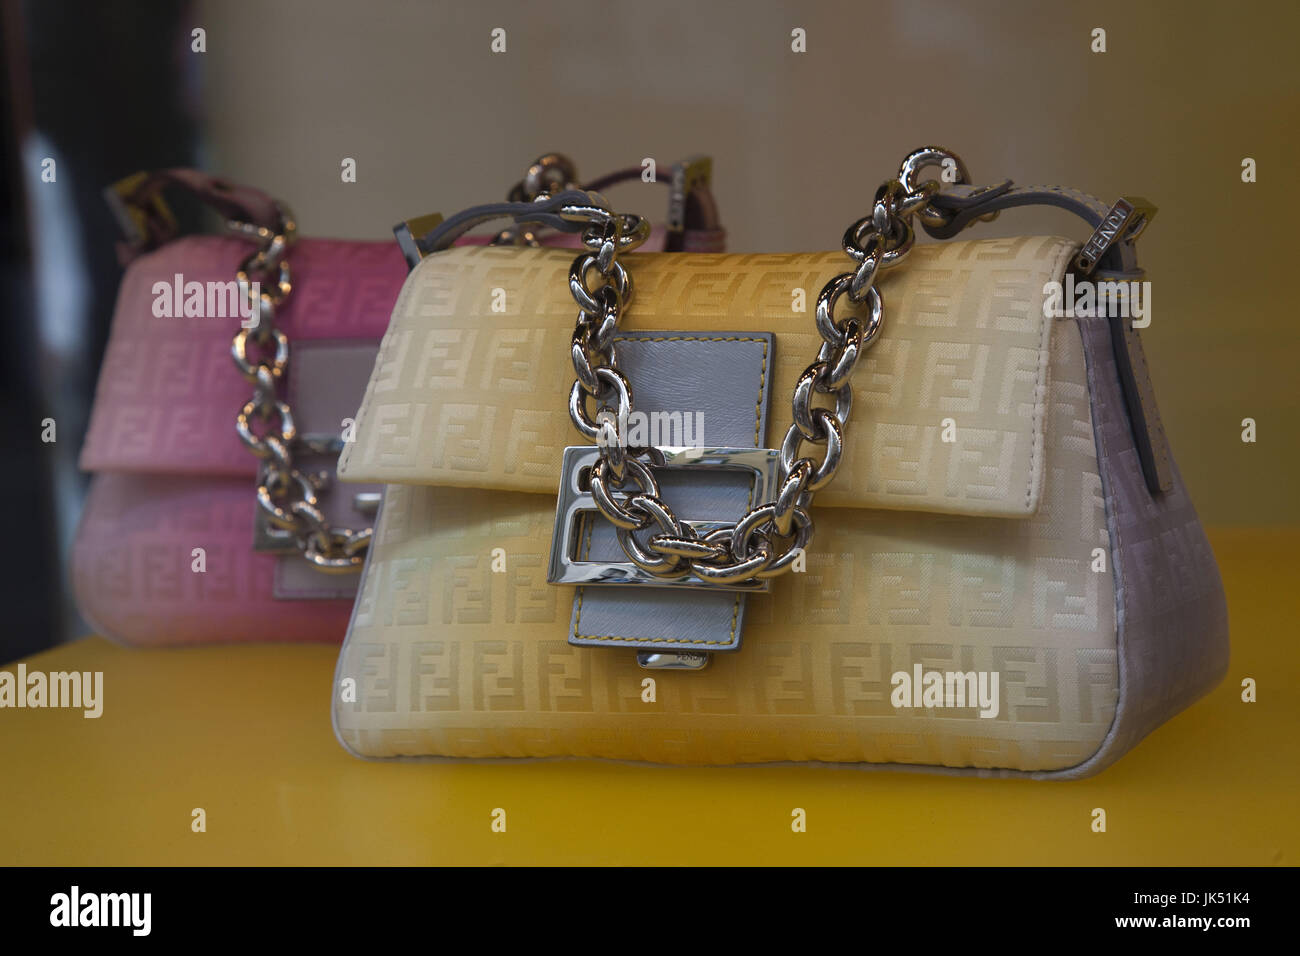 16,502 Luxury Designer Bags Images, Stock Photos, 3D objects